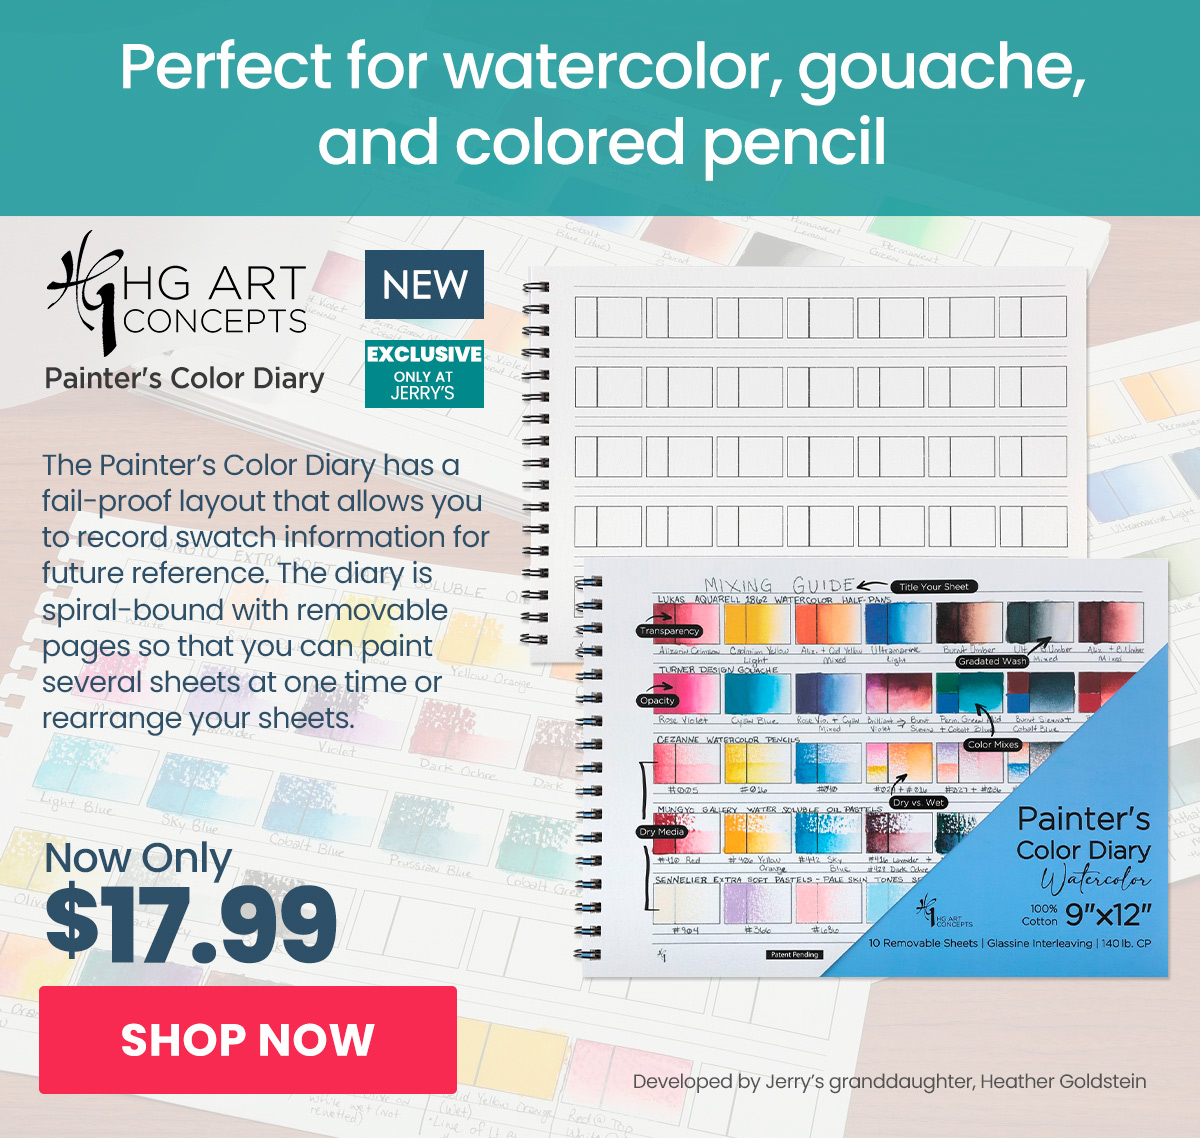 Painter's Color Diary, 9"x12" Watercolor Spiral 140lb Cold Press, 10 Pages